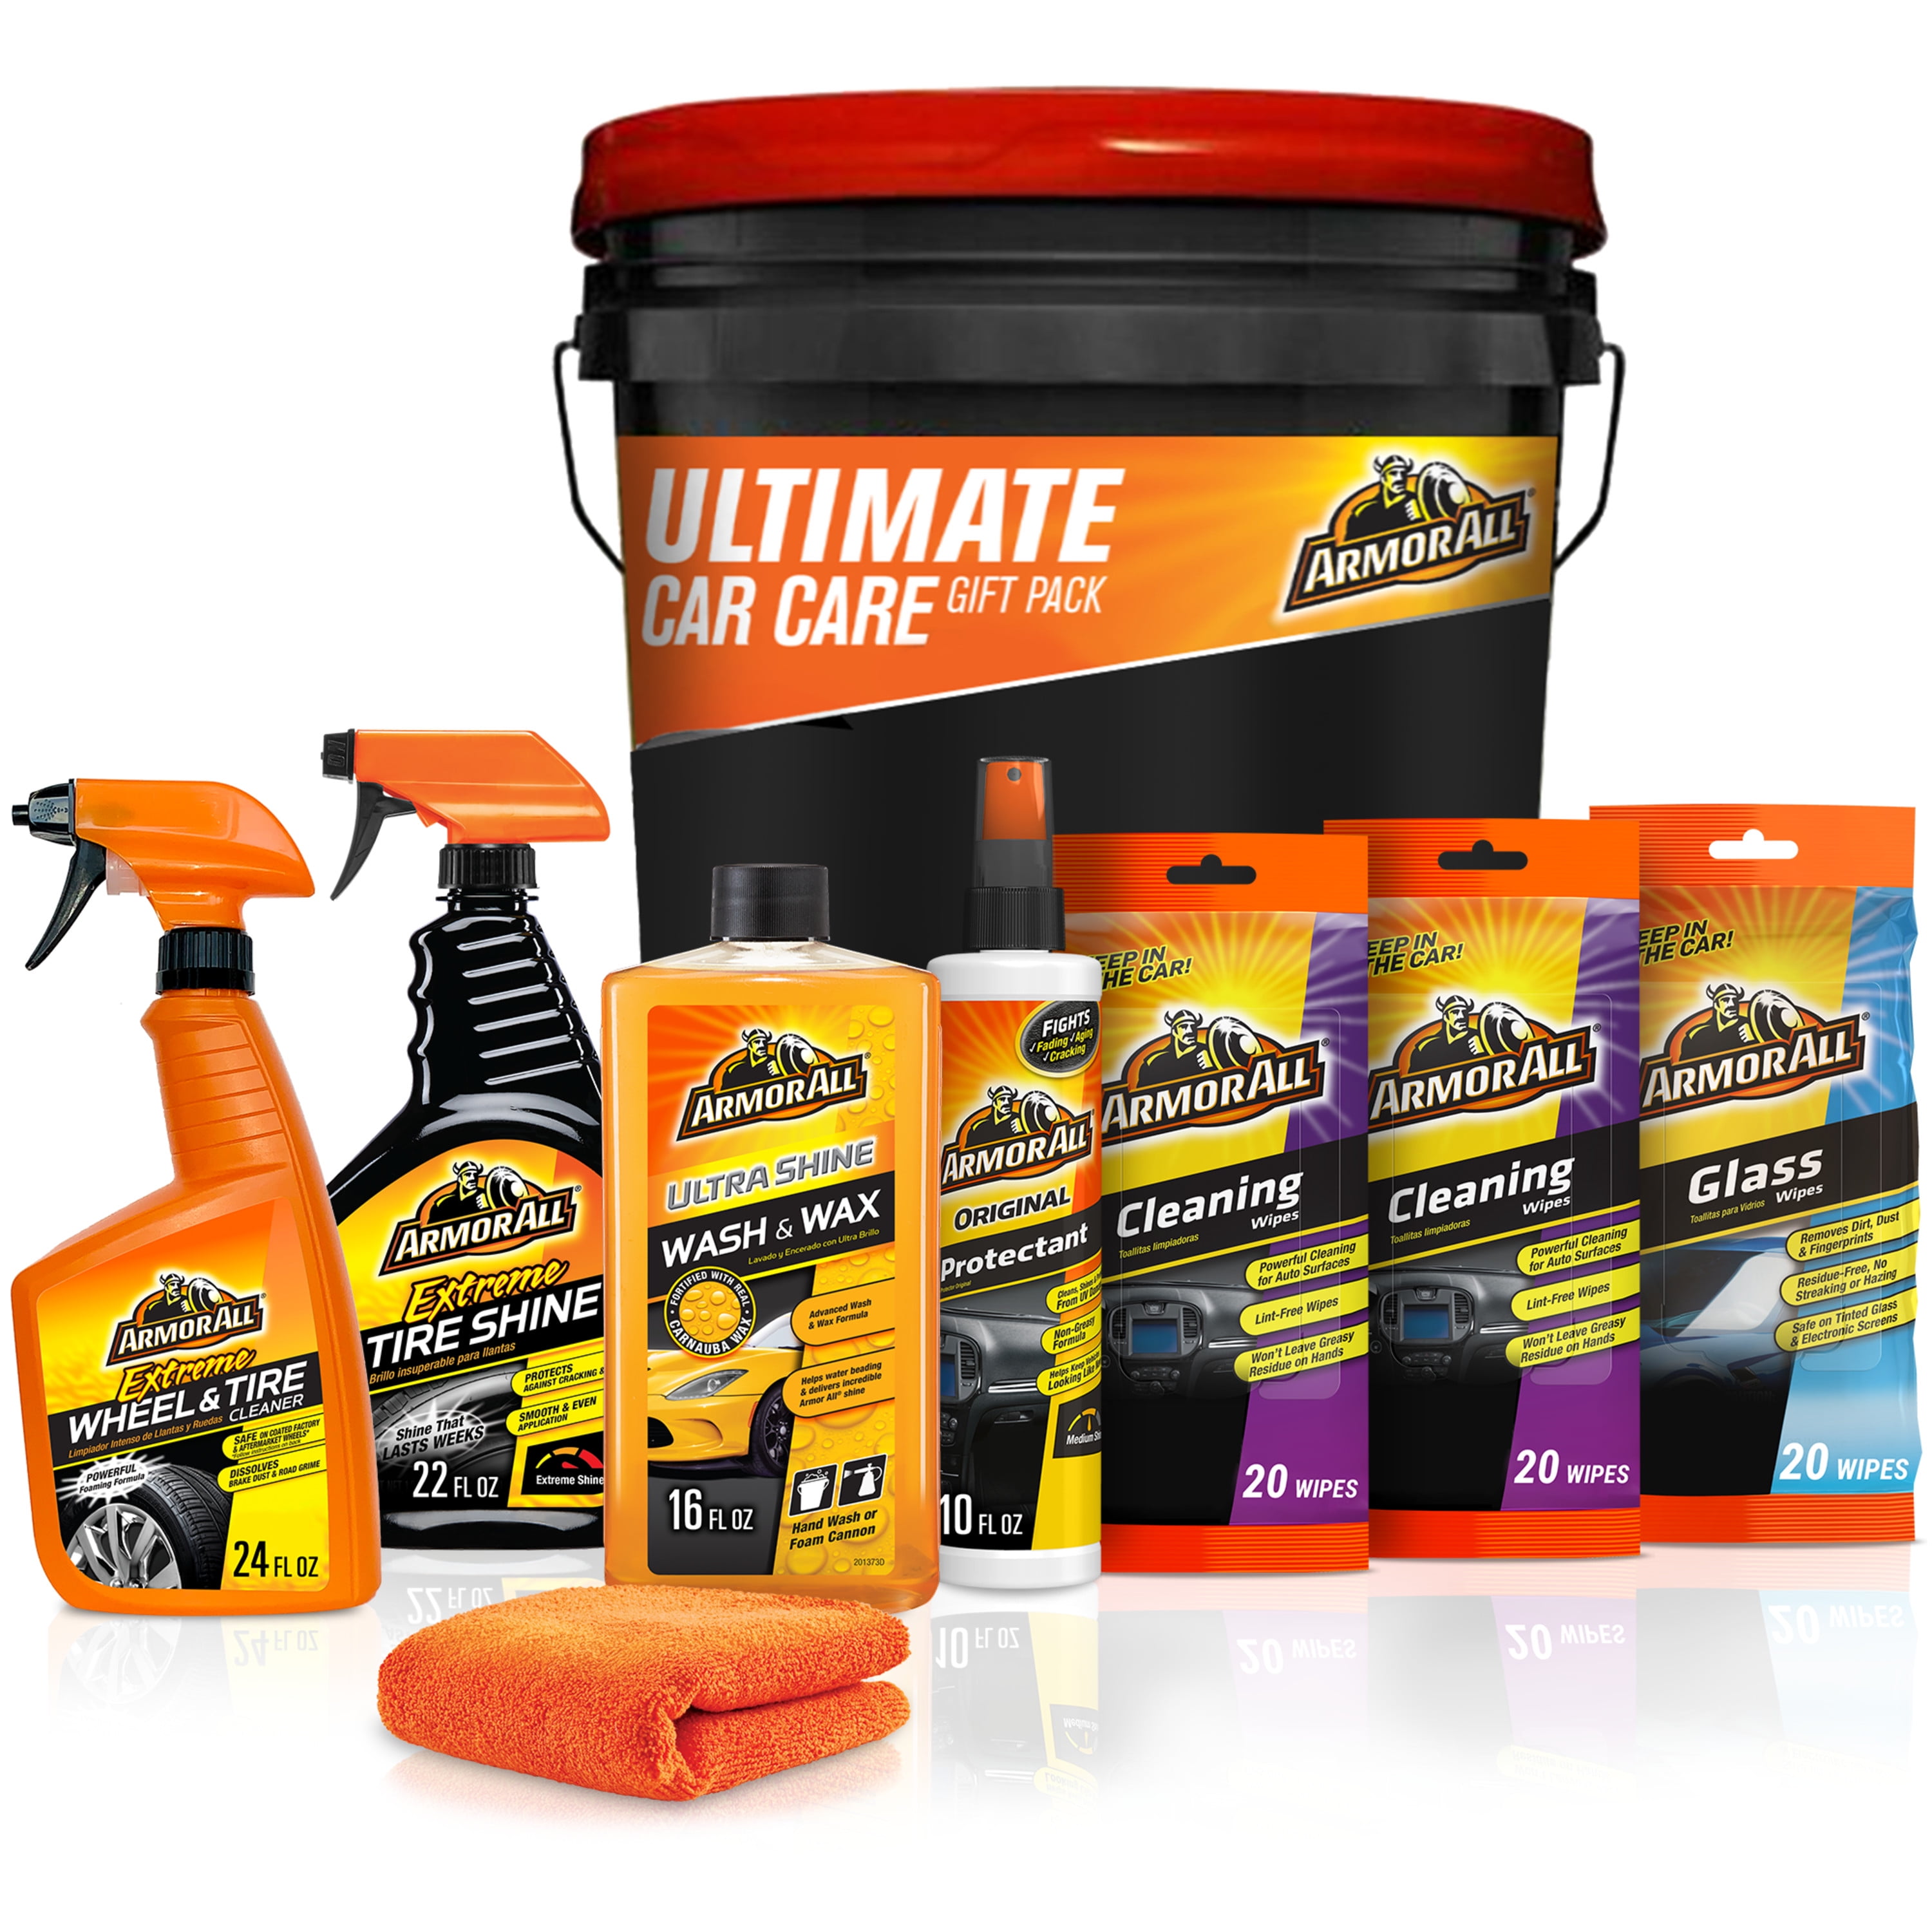 Superior Products - Professional Detailing Supplies & Car Wash Chemicals